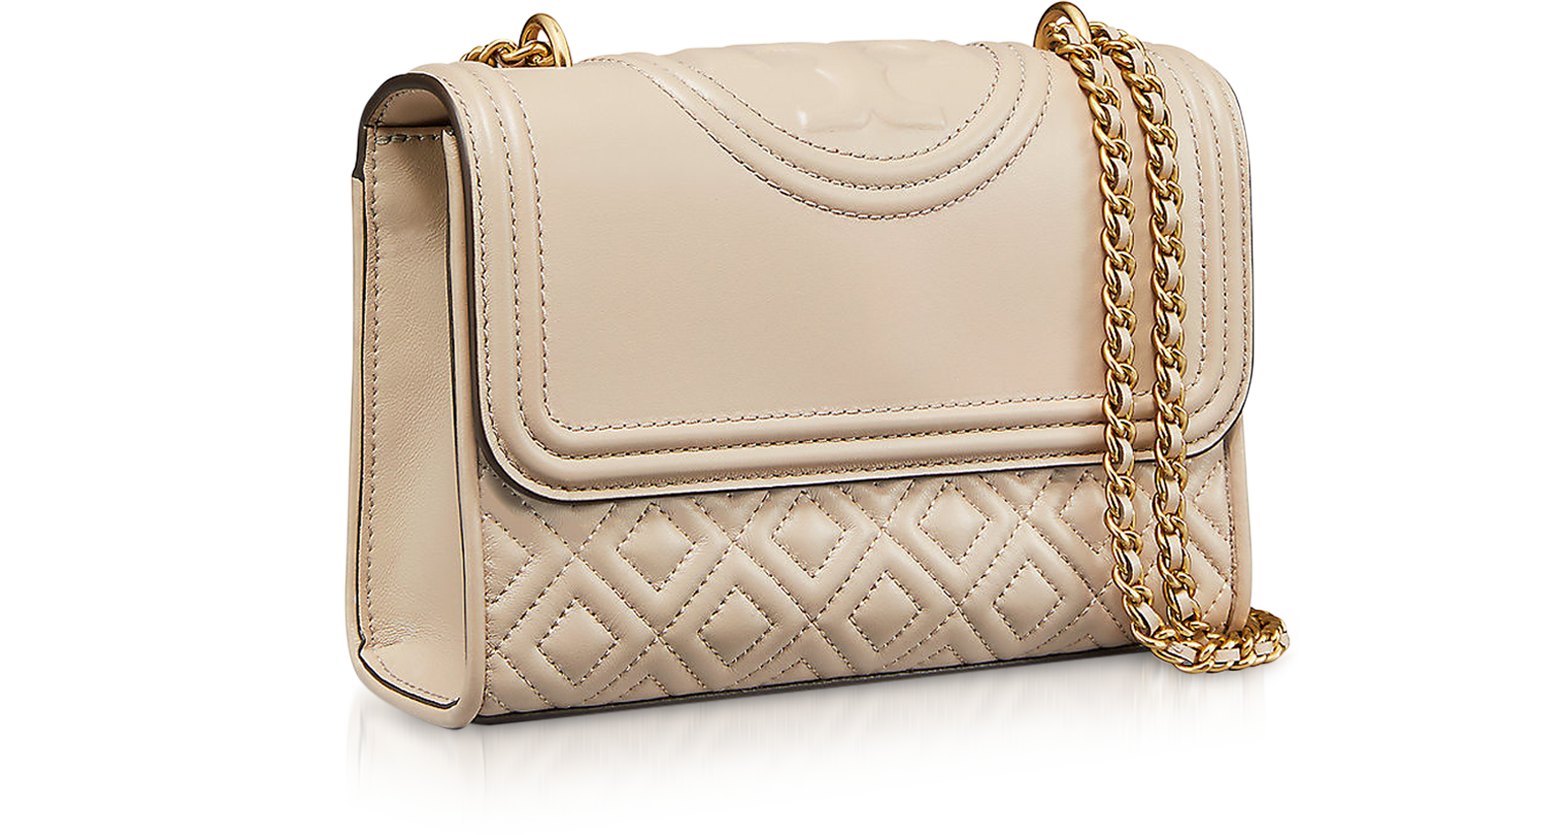 Tory Burch Taupe Light Taupe Fleming Convertible Shoulder Bag at